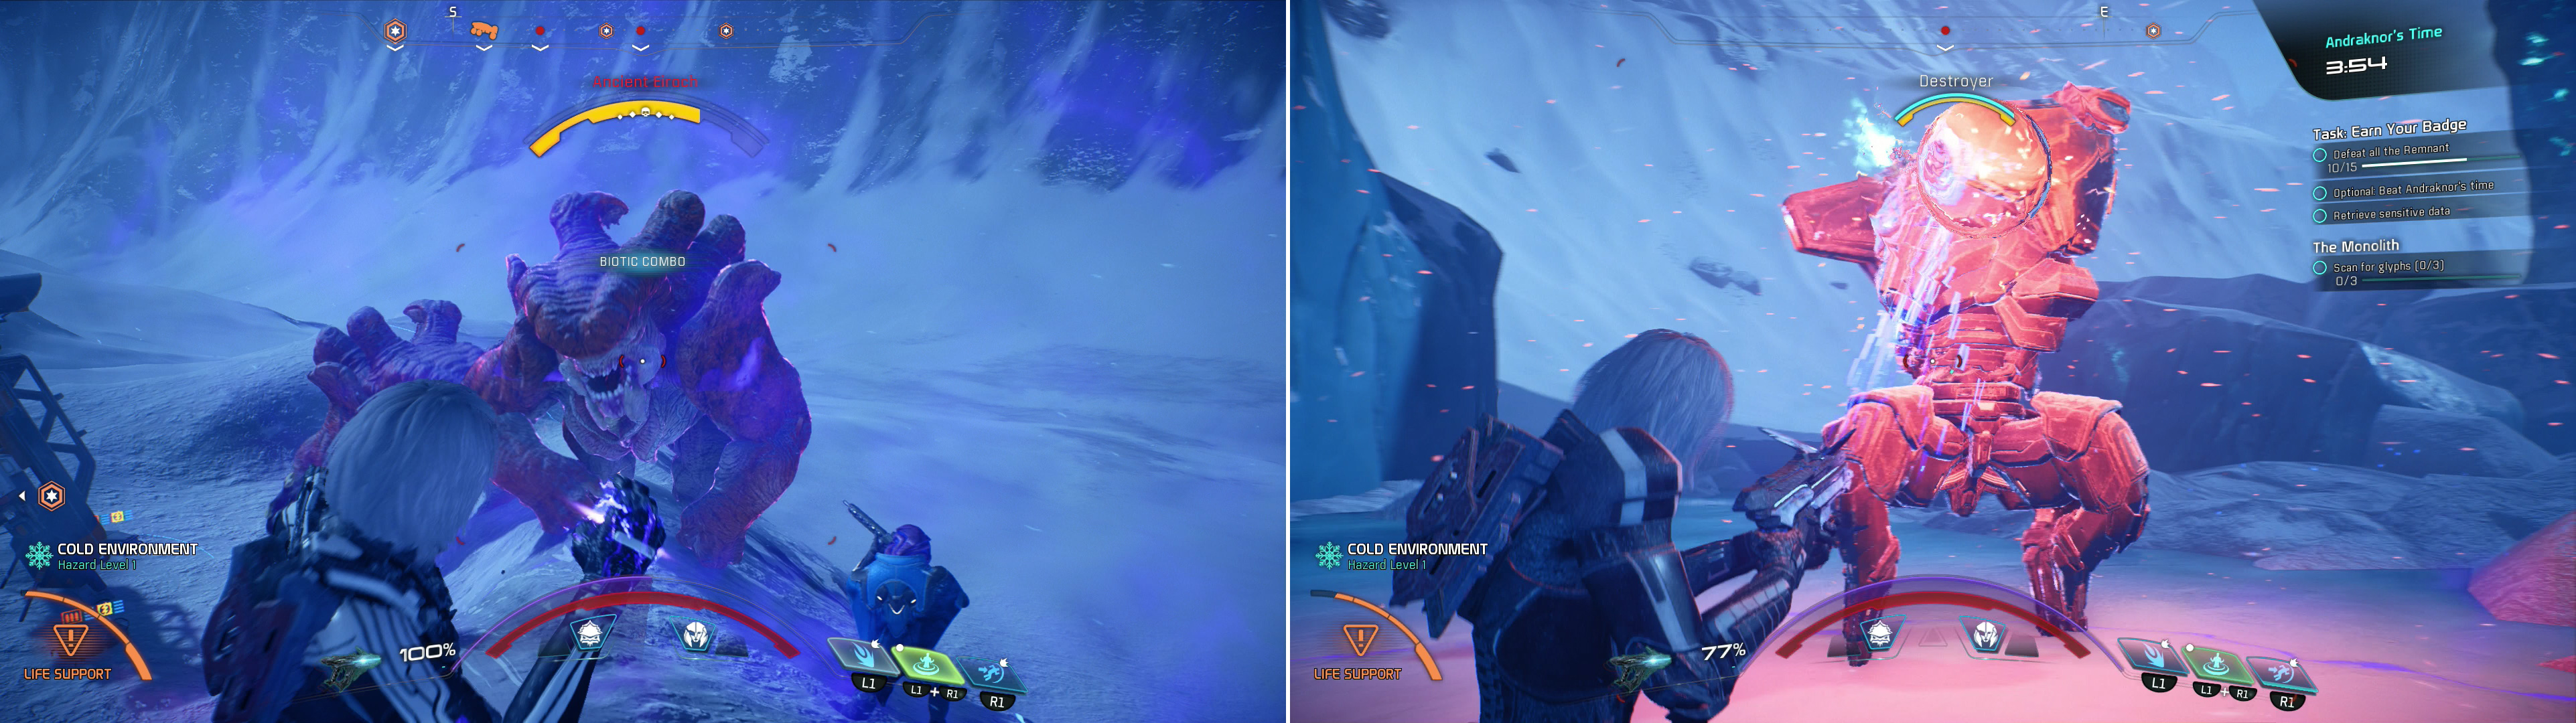 One challenge has you facing off against three Ancient Eirochs (left) while another has you killing a host of Remnant as quickly as possible (right).